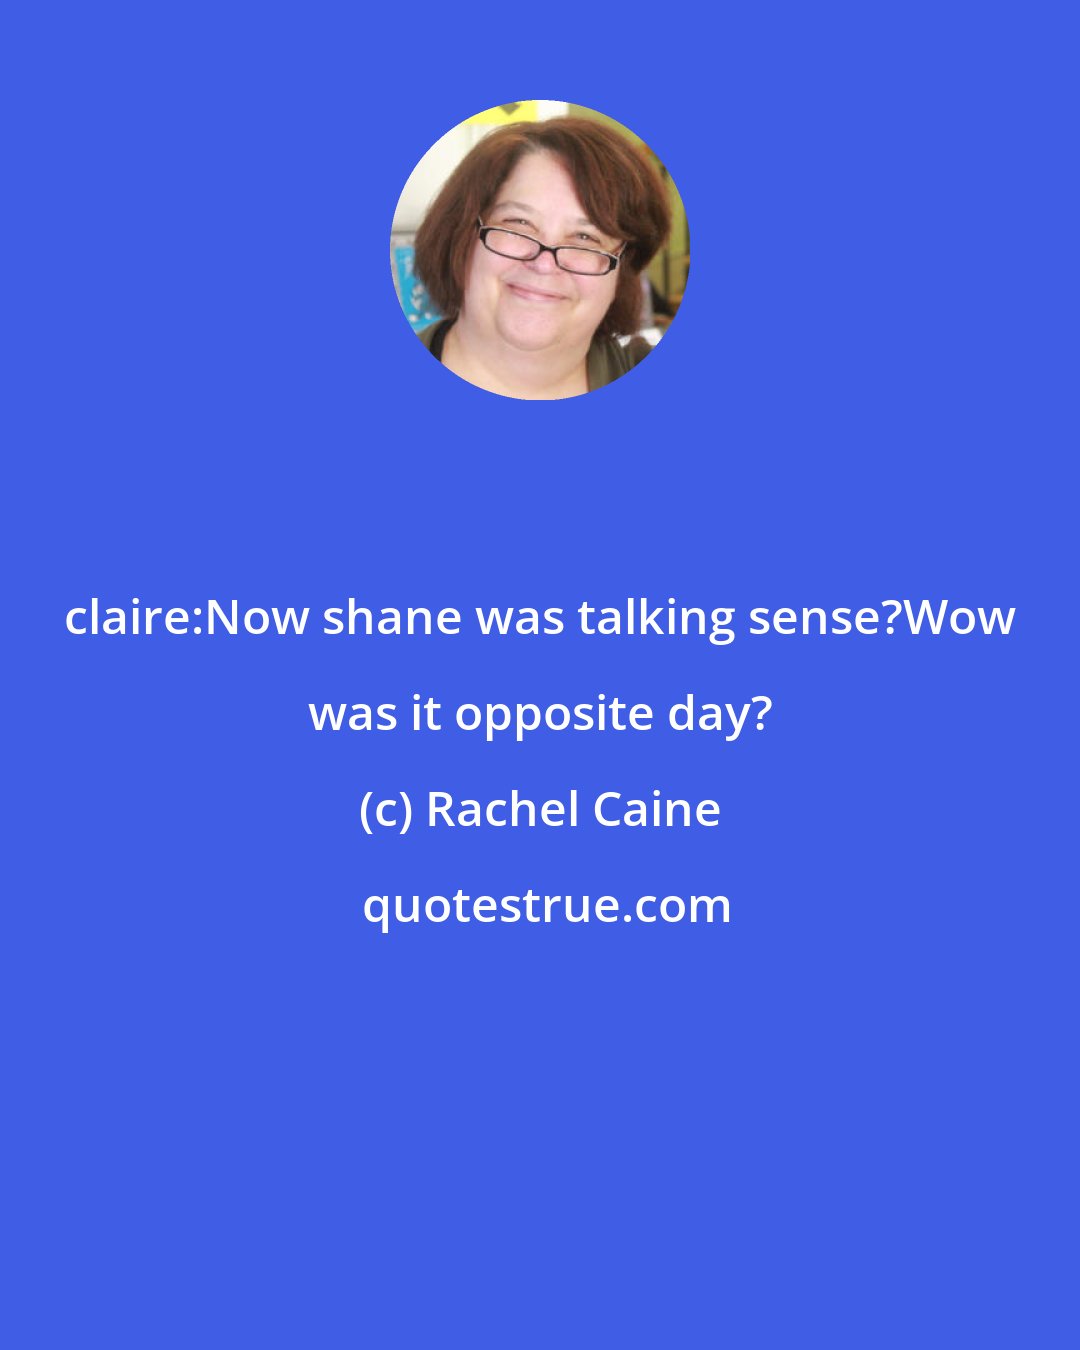 Rachel Caine: claire:Now shane was talking sense?Wow was it opposite day?